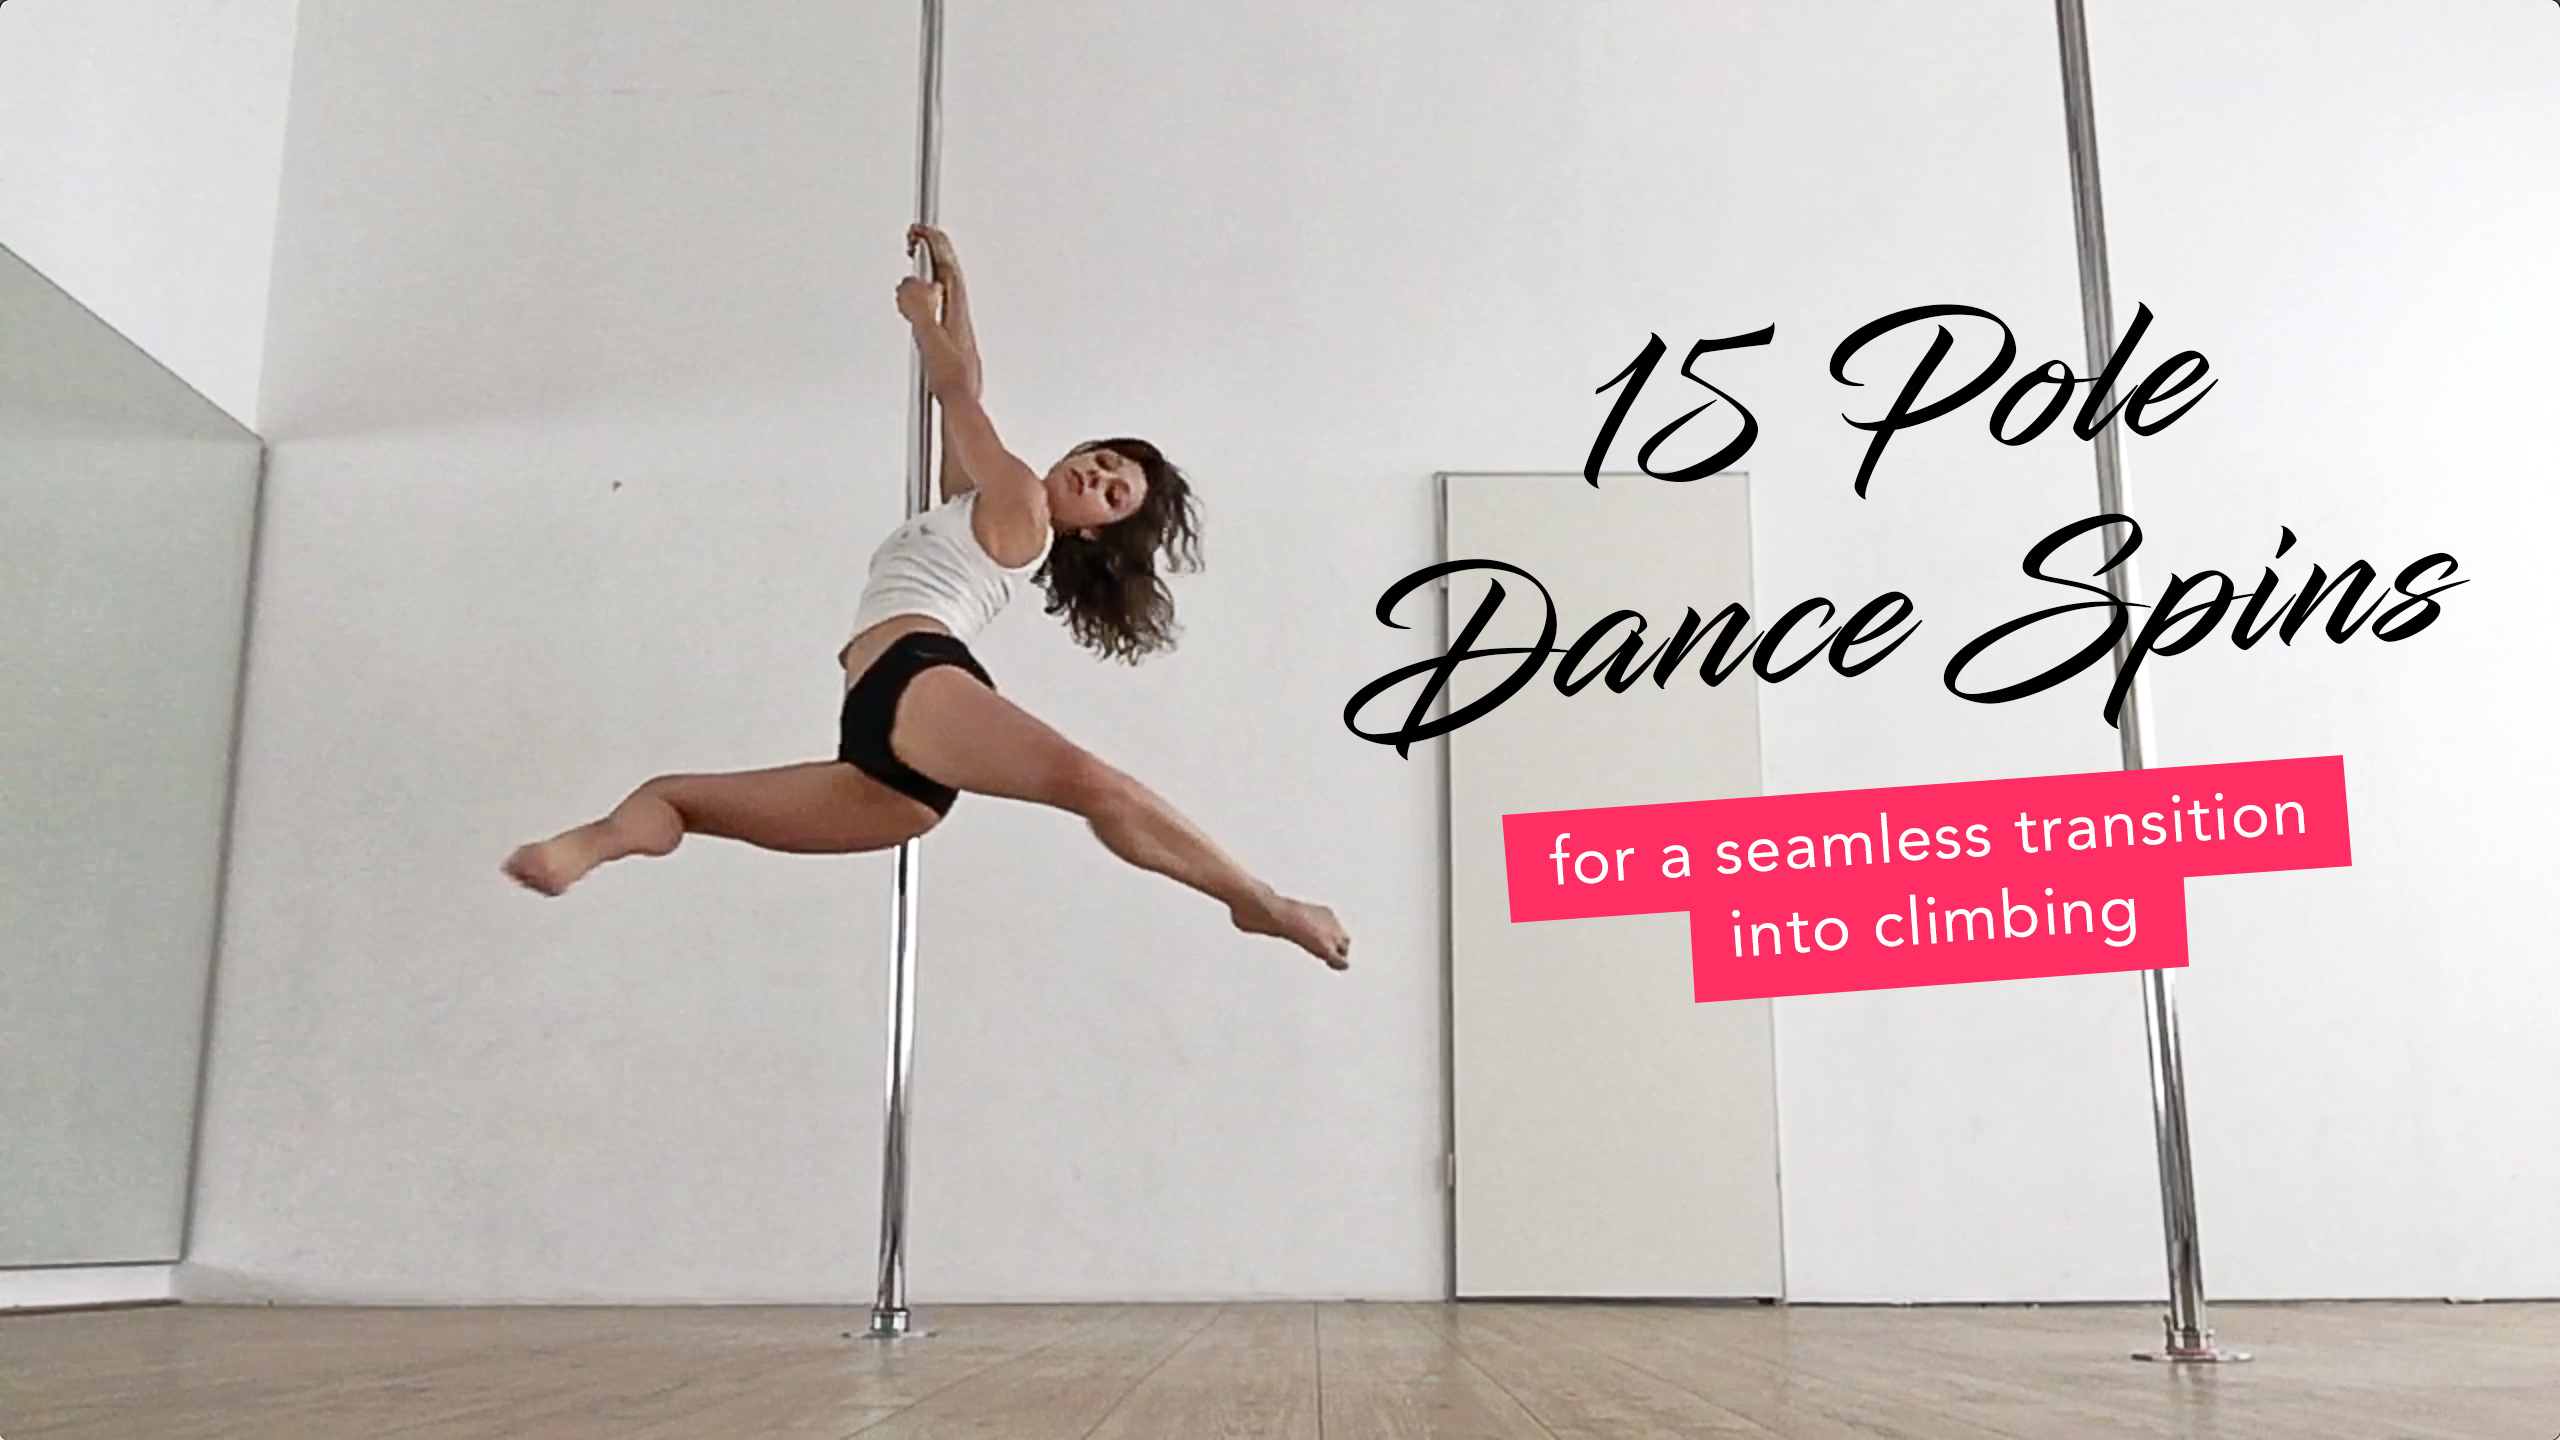 25 - 10 Pole Dance Spins using the split grip - 10 Pole Spins for beginners  